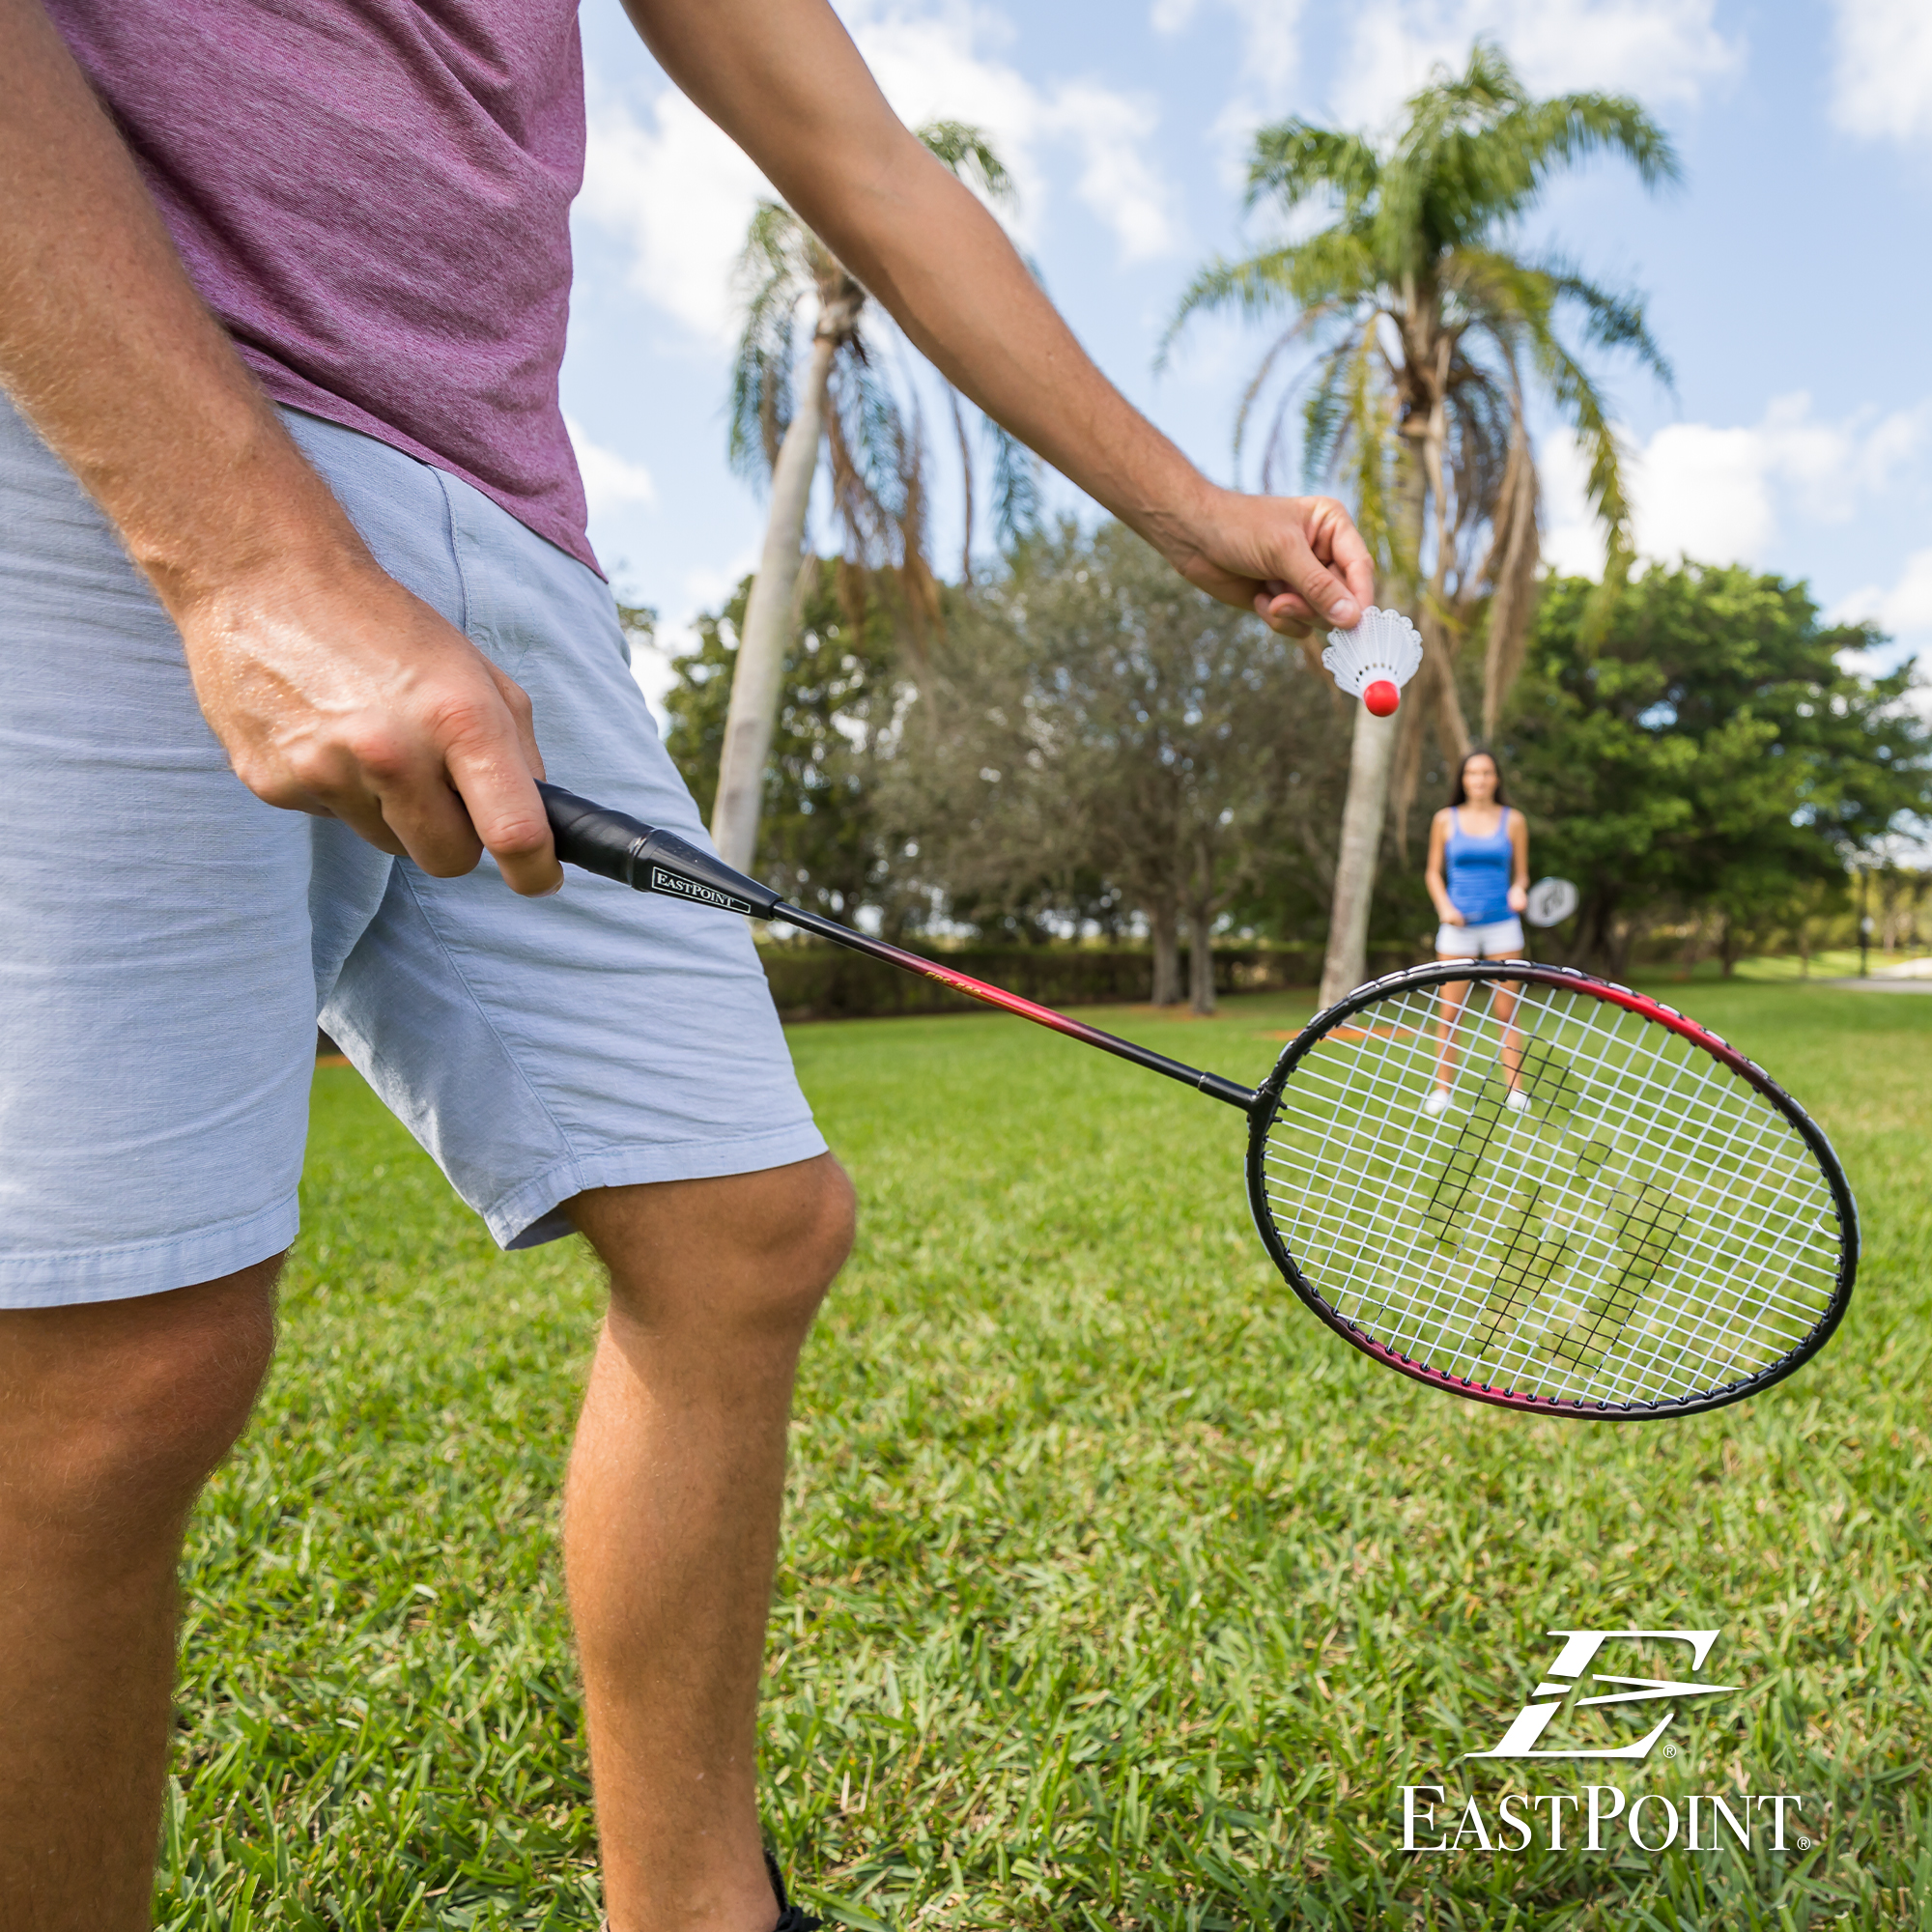 EastPoint Sports 2 Player Badminton Racket Set; Contains 2 Rackets with Tempered Steel Shafts, Comfort Handles and 2 Durable, White Shuttlecock Birdies - image 5 of 7